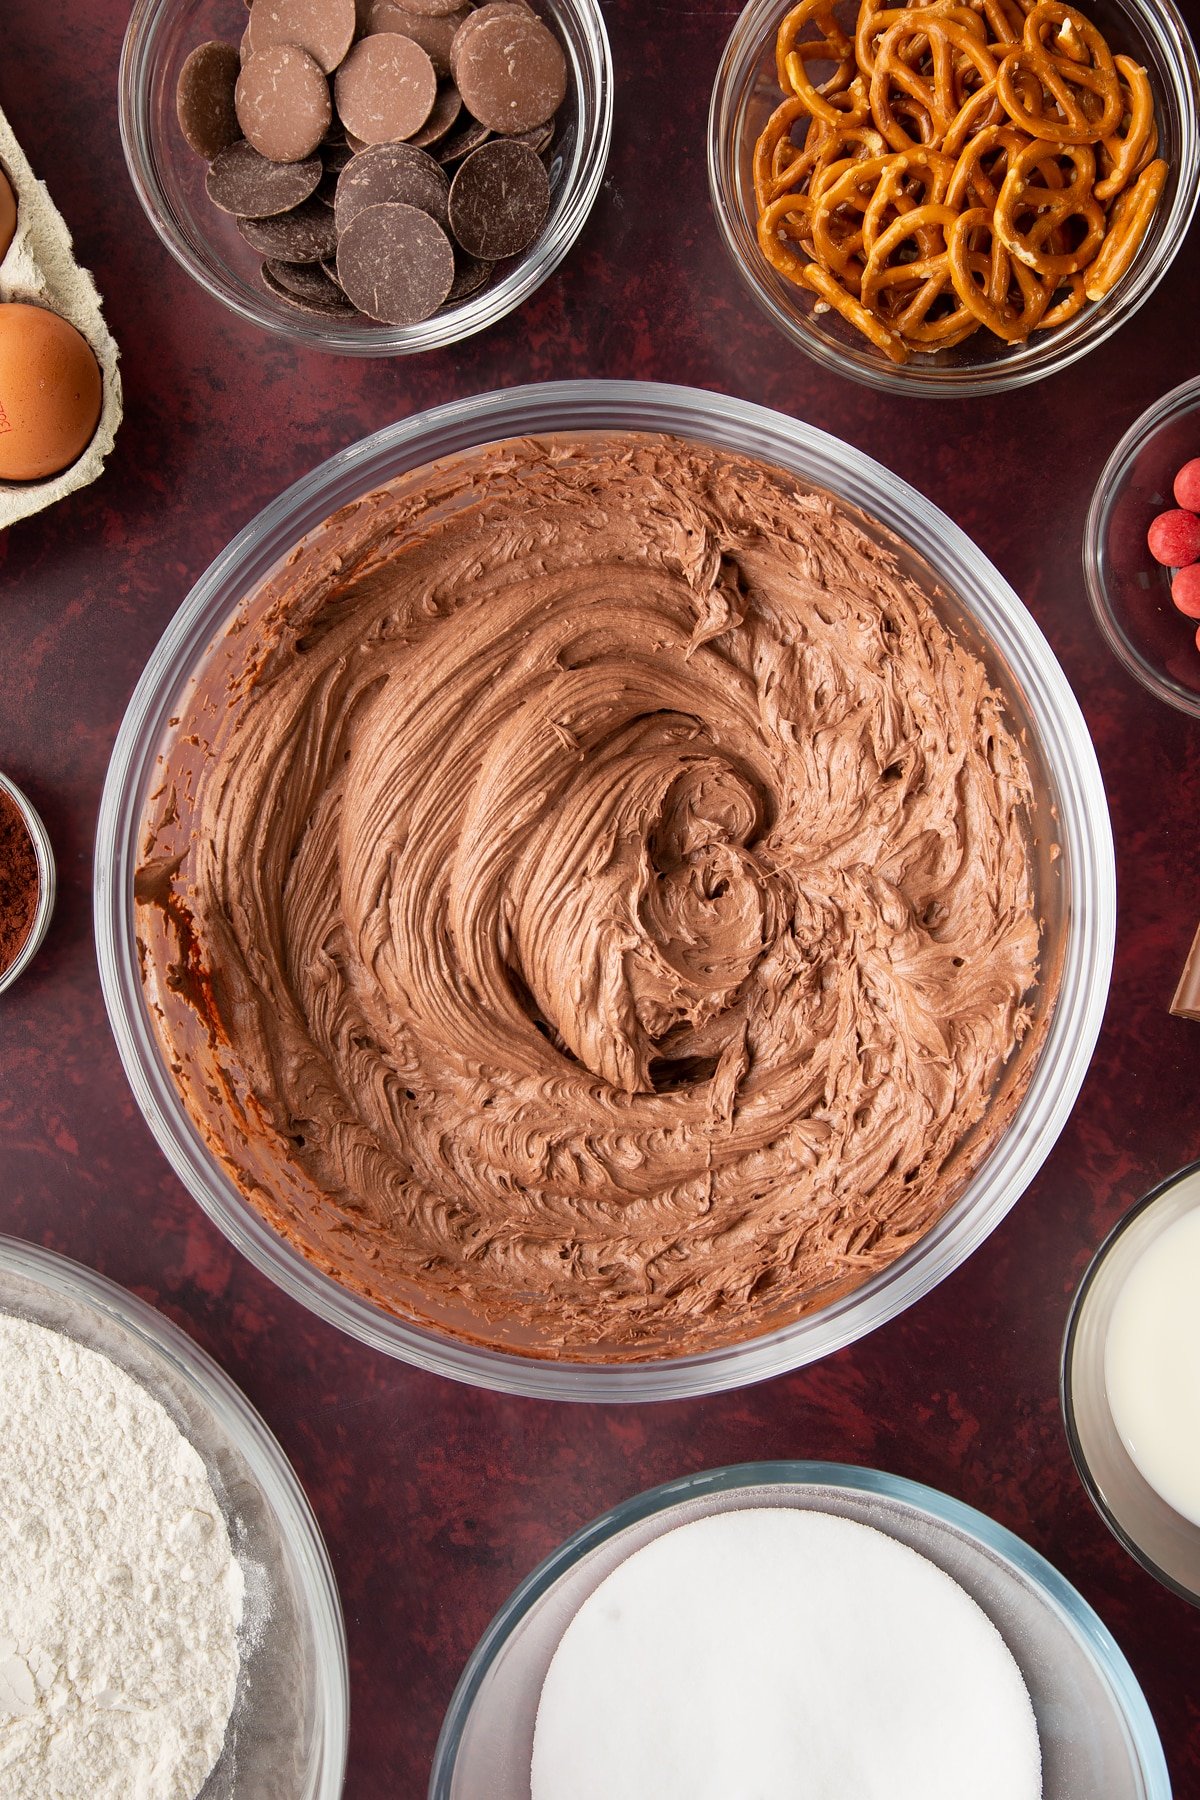 Chocolate frosting in a mixing bowl. Ingredients to make reindeer cupcakes surround the bowl.